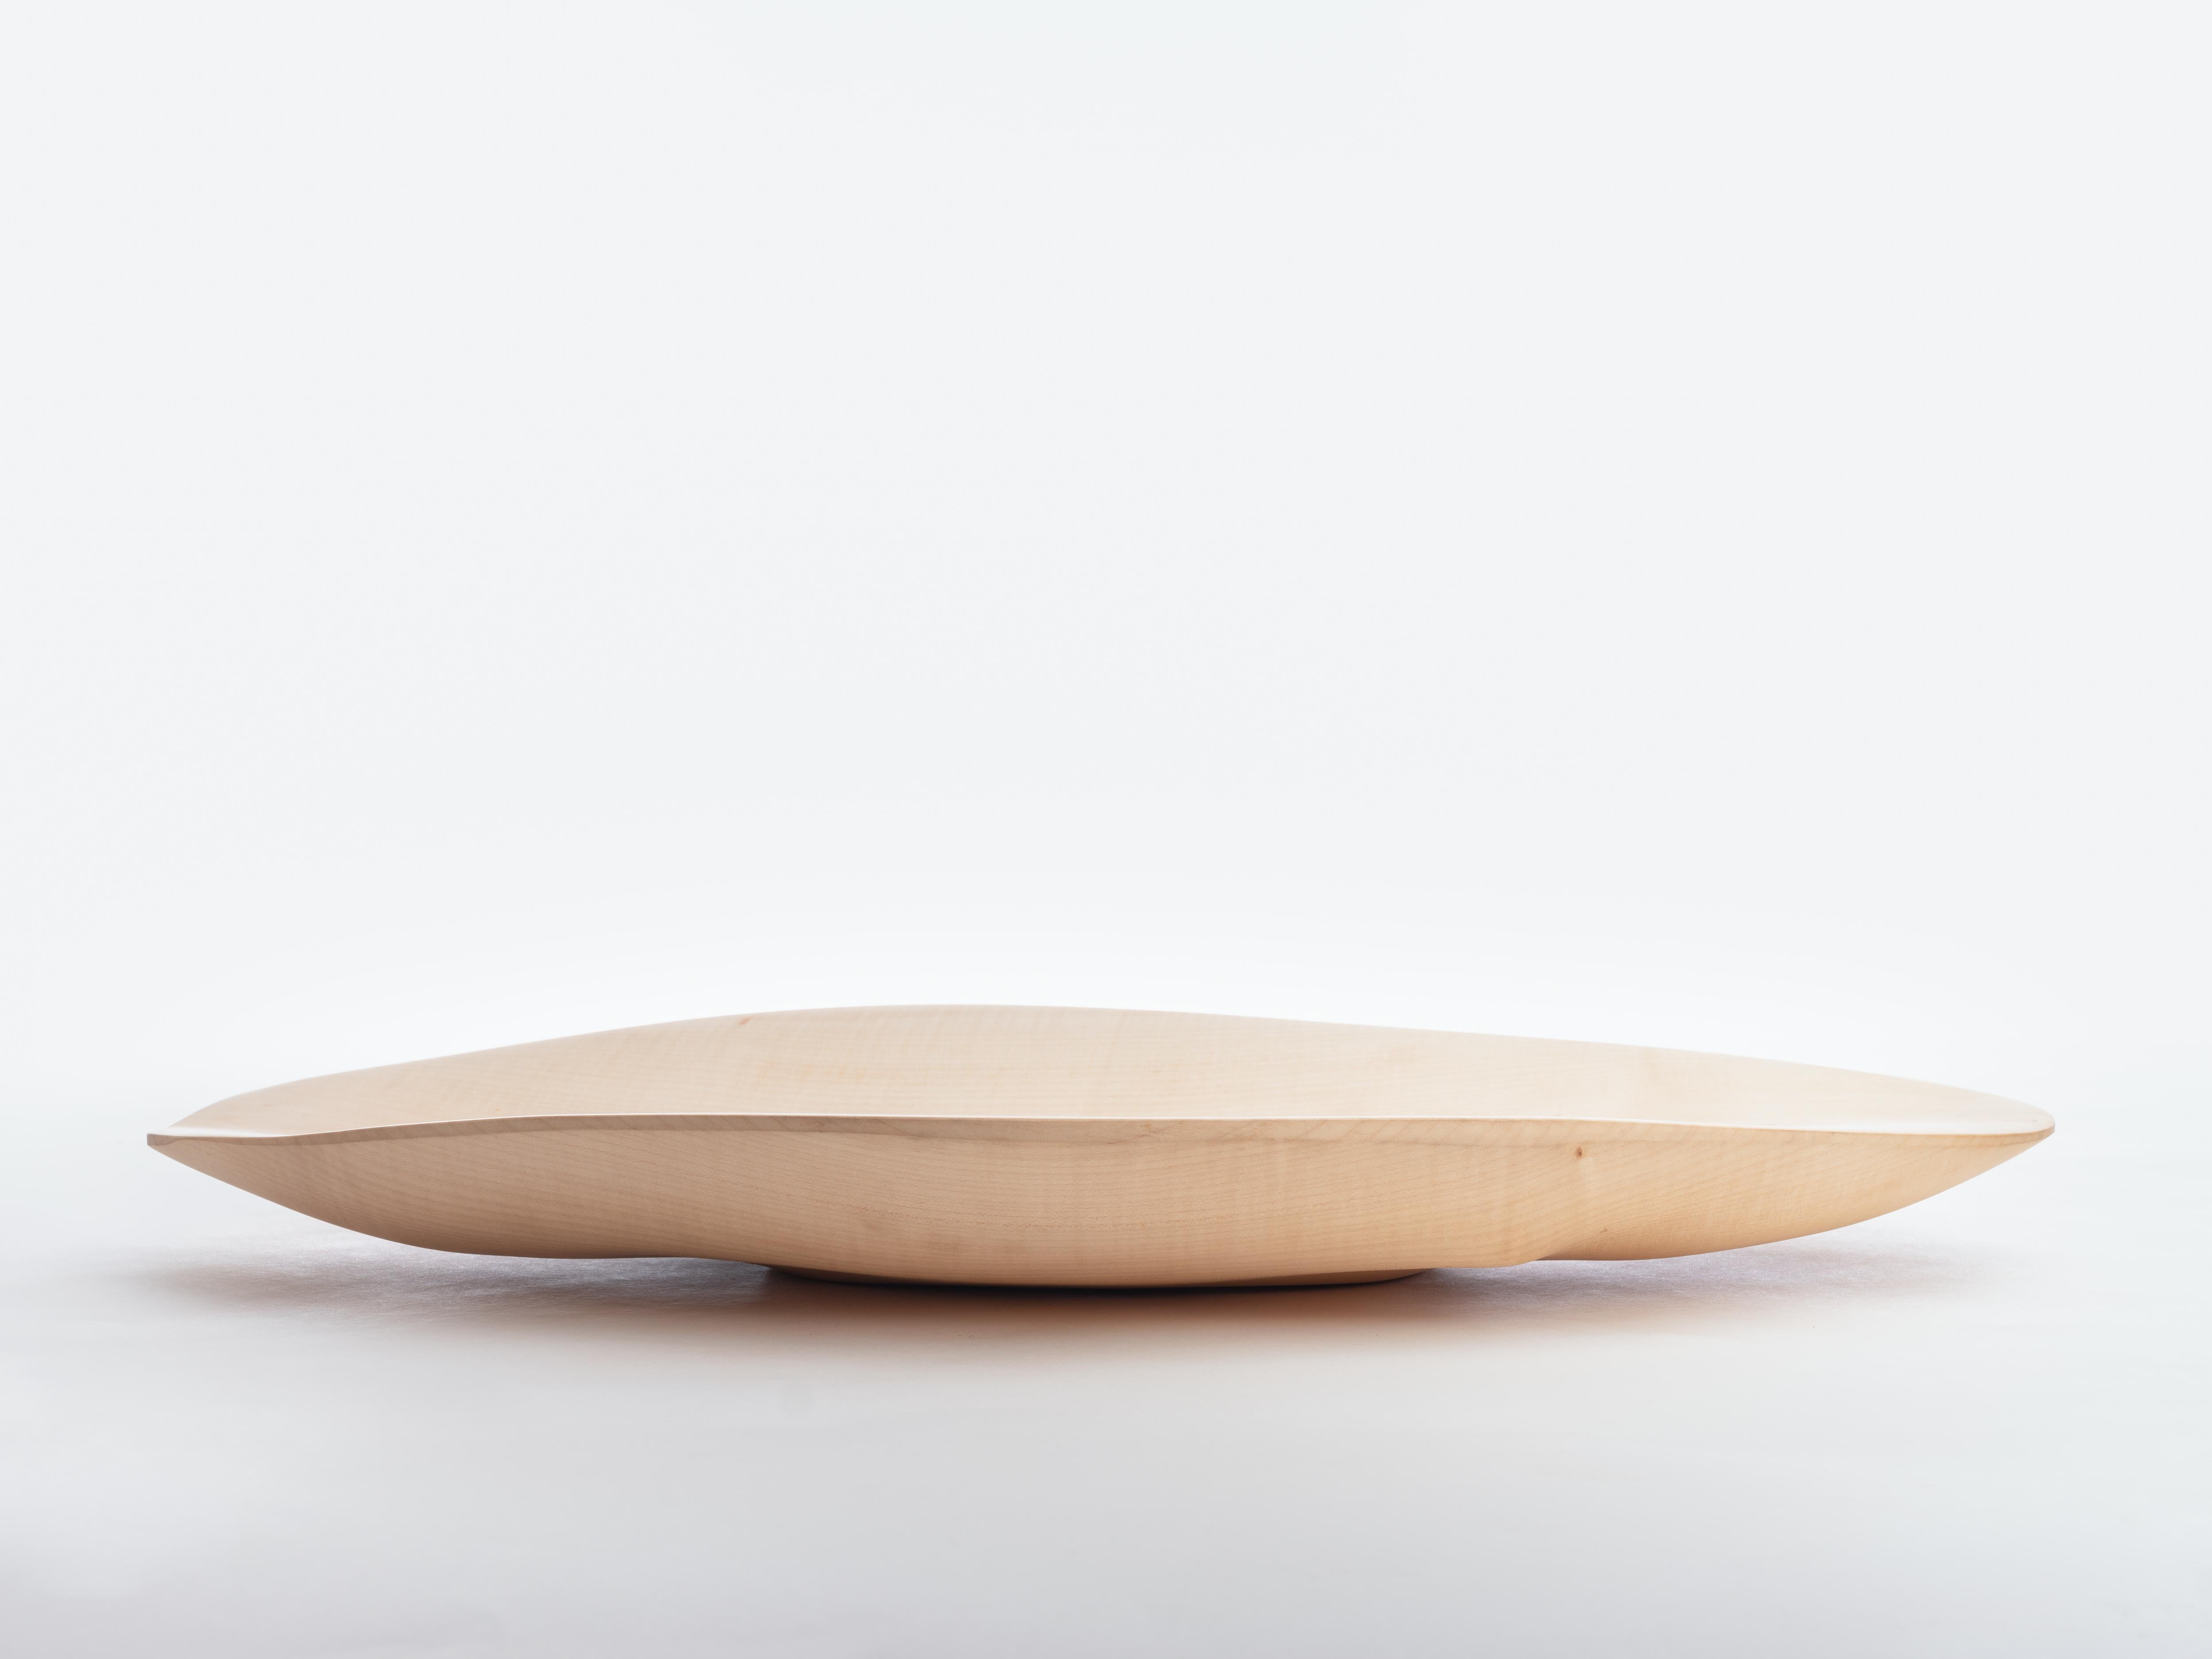 Intuitive Archaisme Table Tray by Cedric Breisacher
Dimension: D 60 x W 30 x H 7 cm
Materials: Sycamore.
Finish: Natural wax-oiled.

Designer-sculptor, Cedric Breisacher has an atypical path. Self-taught man, he followed during five years an